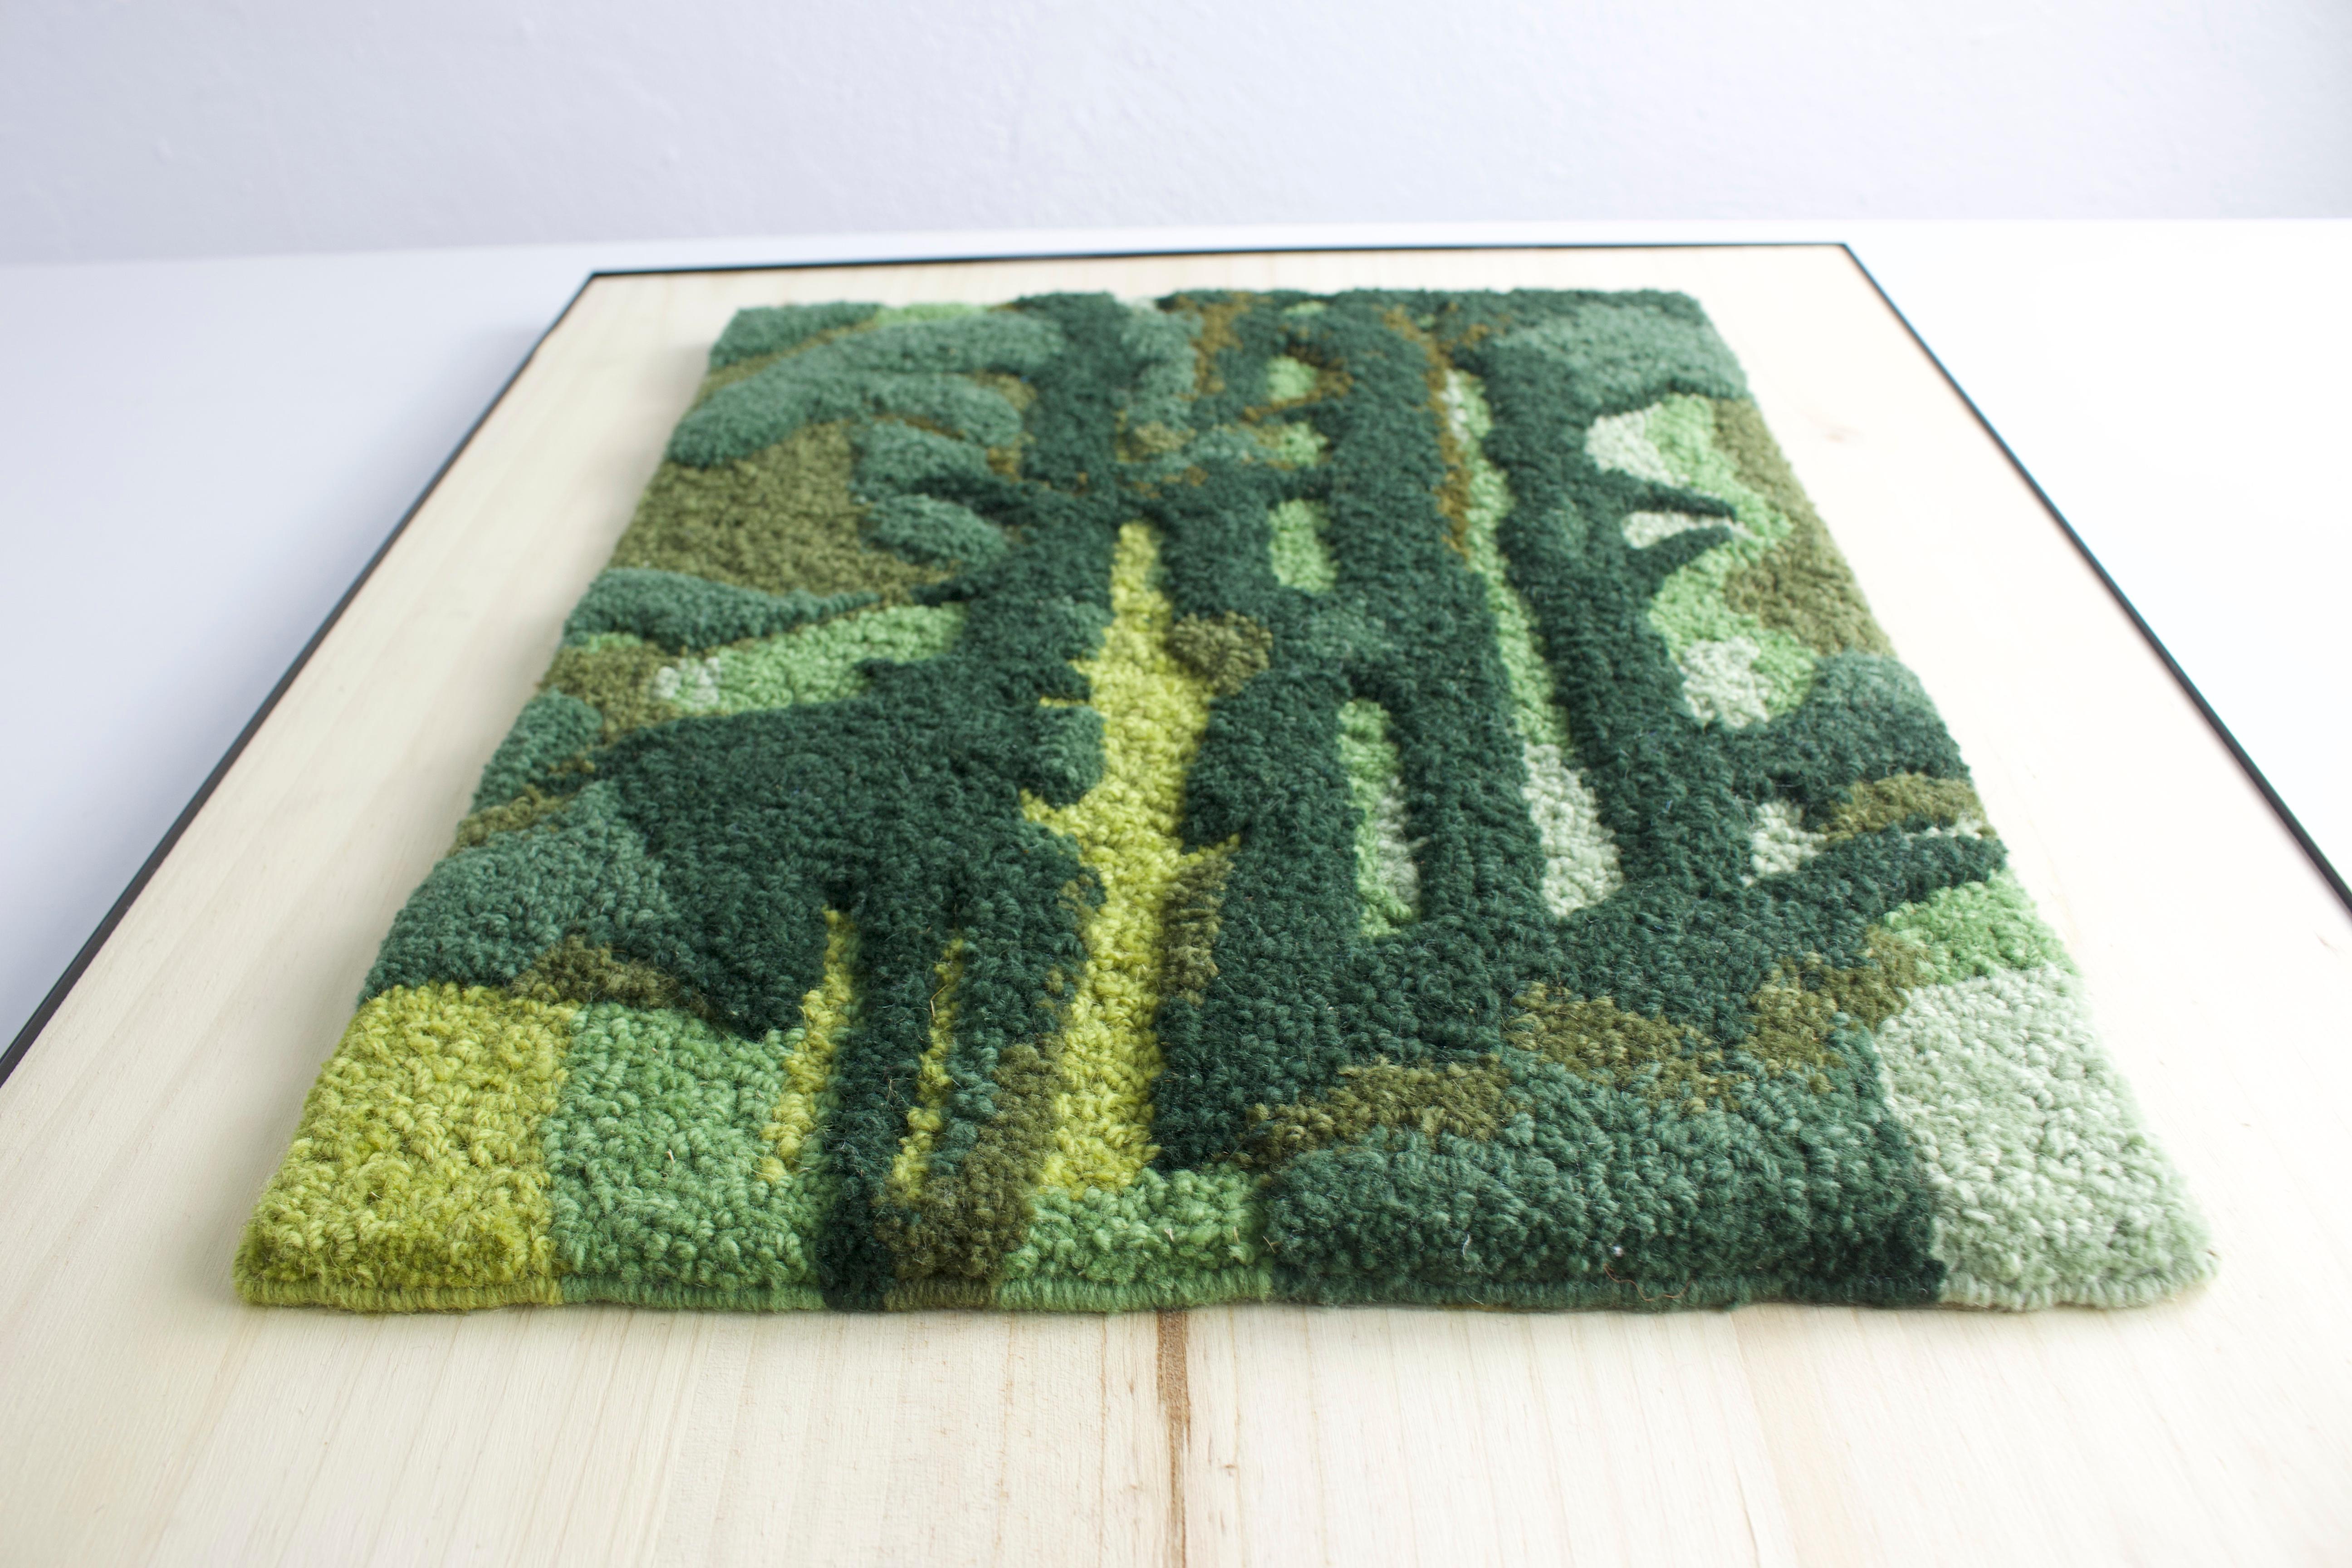 This artwork is handmade using punch needle technique and 100% Portuguese wool yarn with anti-moth treatment. The bass-relief is carved with scissors, creating different heights and a textured based landscape. The frame is made from pine wood with